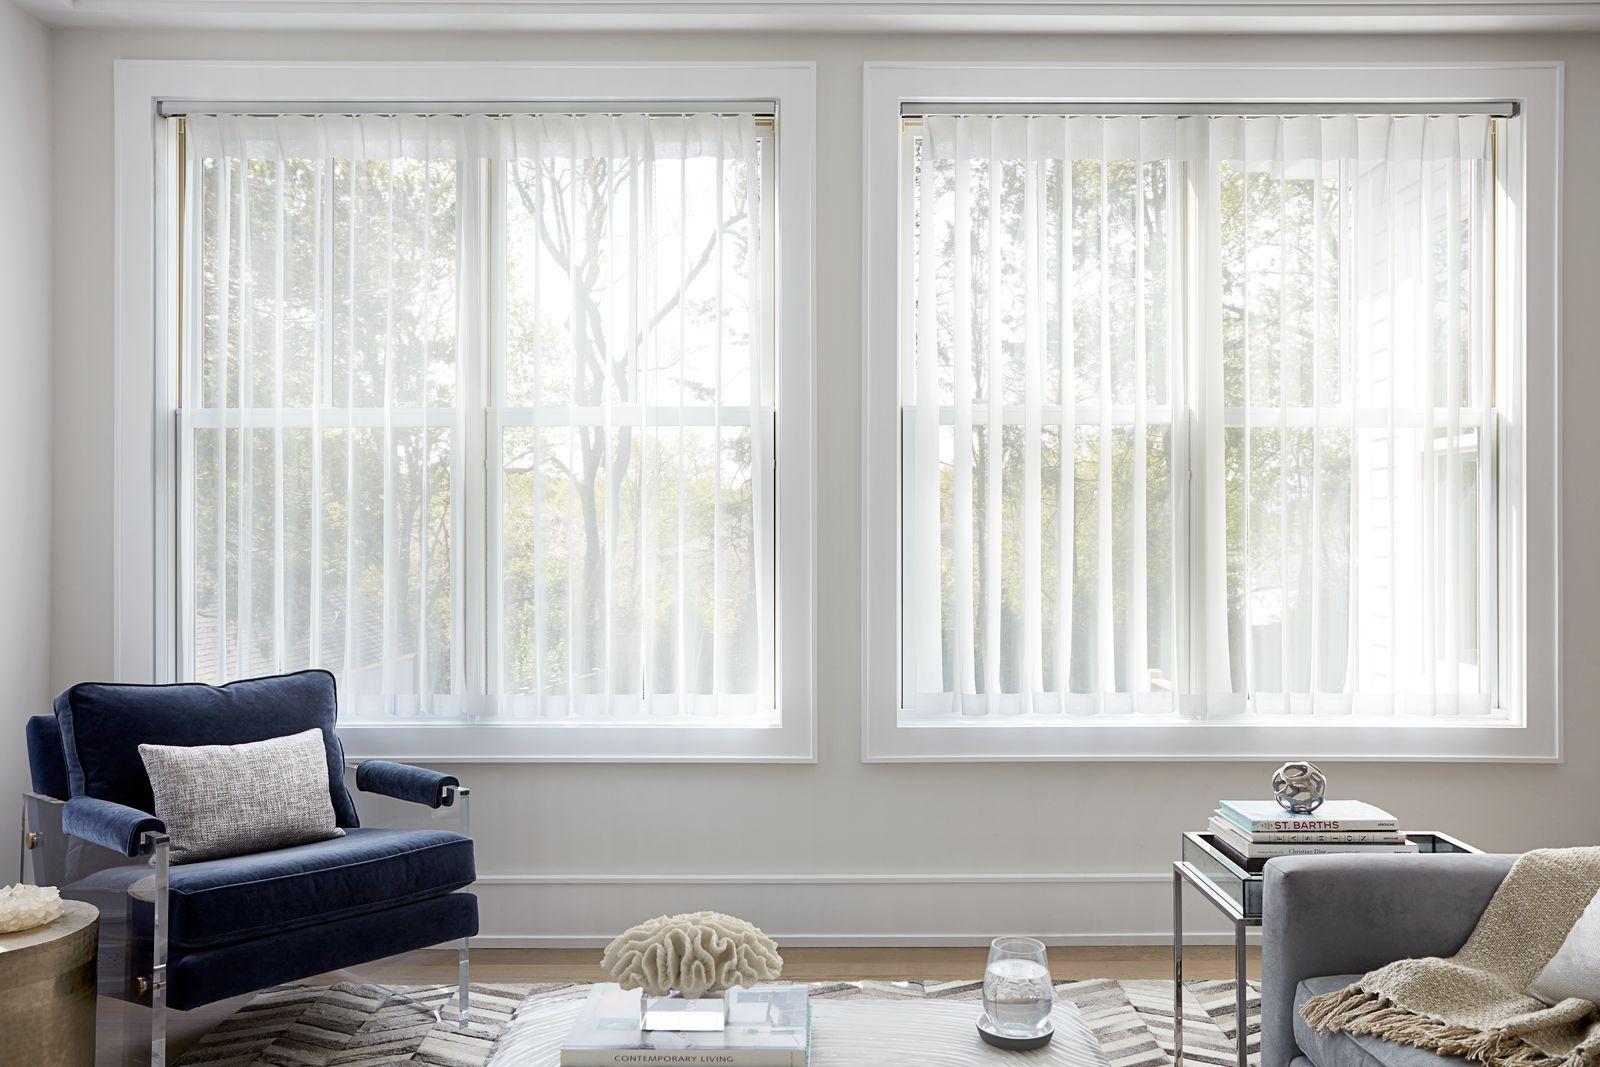 Melody vertical sheers in white hang in two large side by side windows in a modern living room.